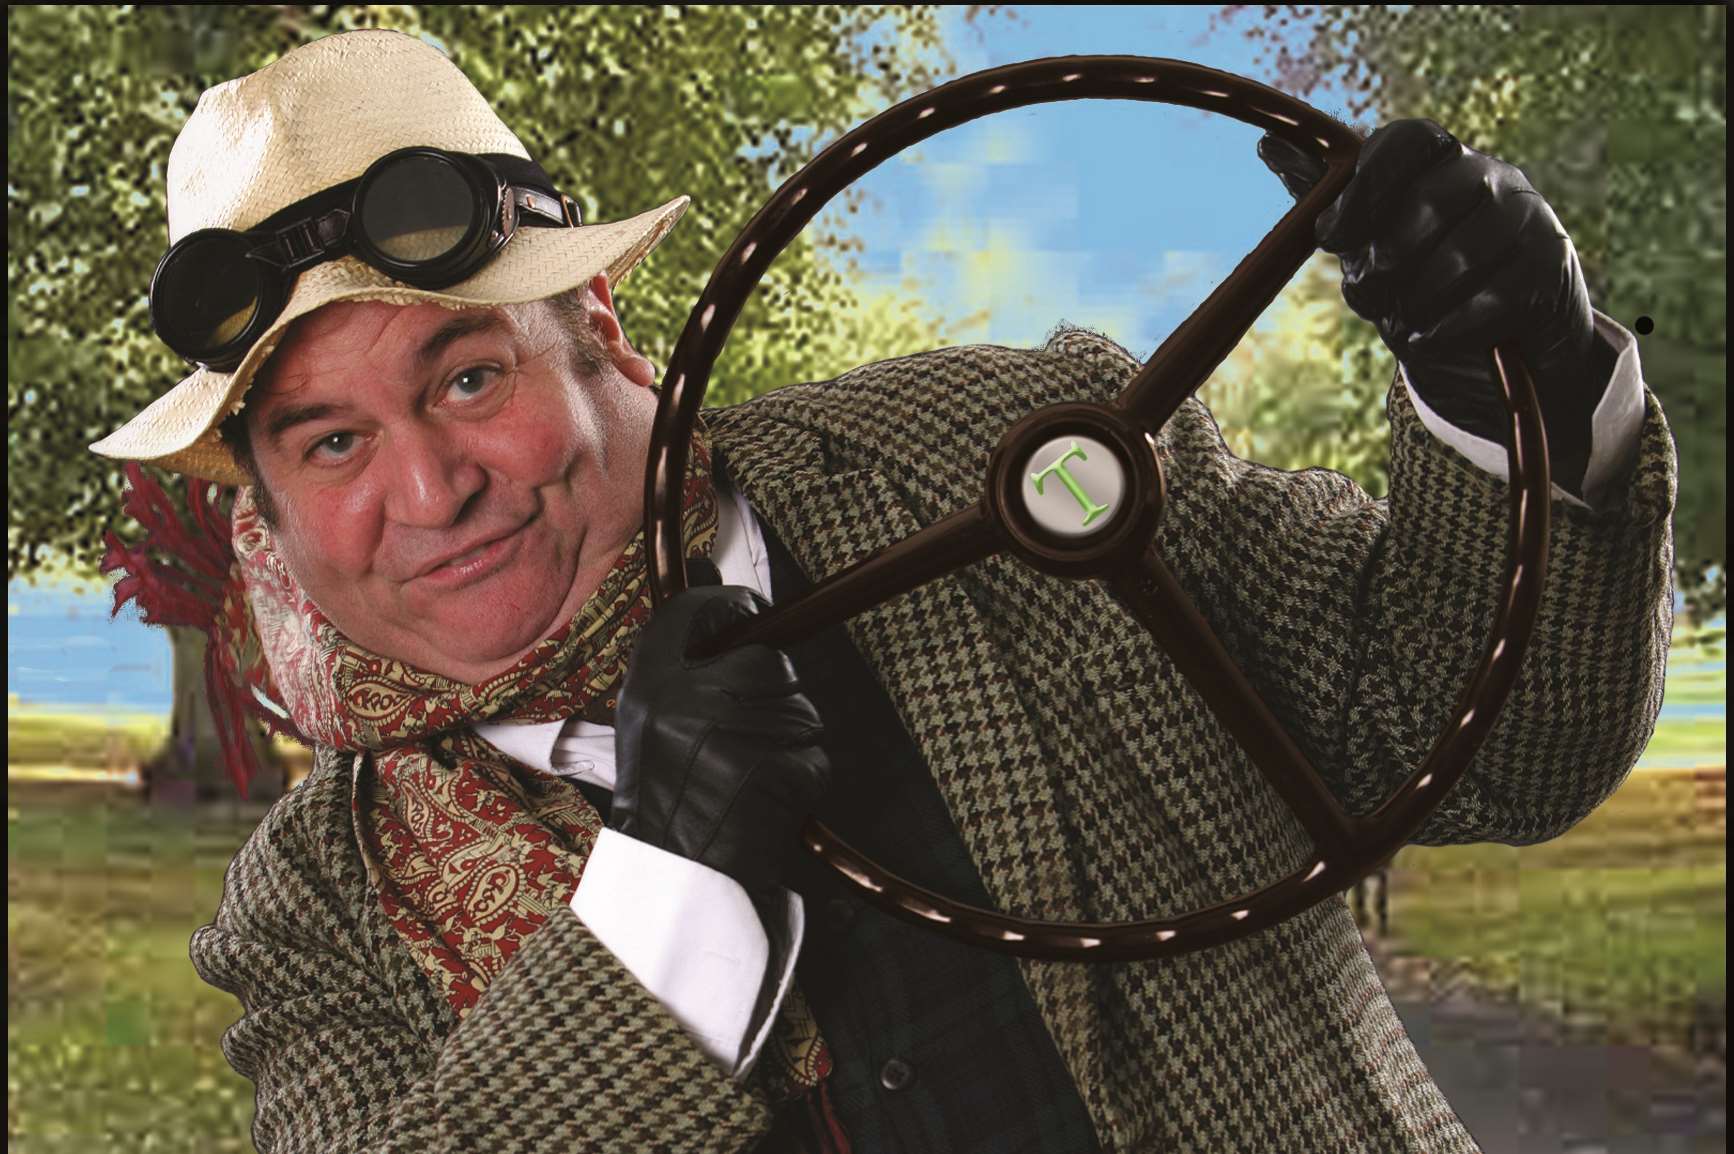 Chapterhouse Theatre Company will bring The Wind in the Willows to Belmont House and Gardens